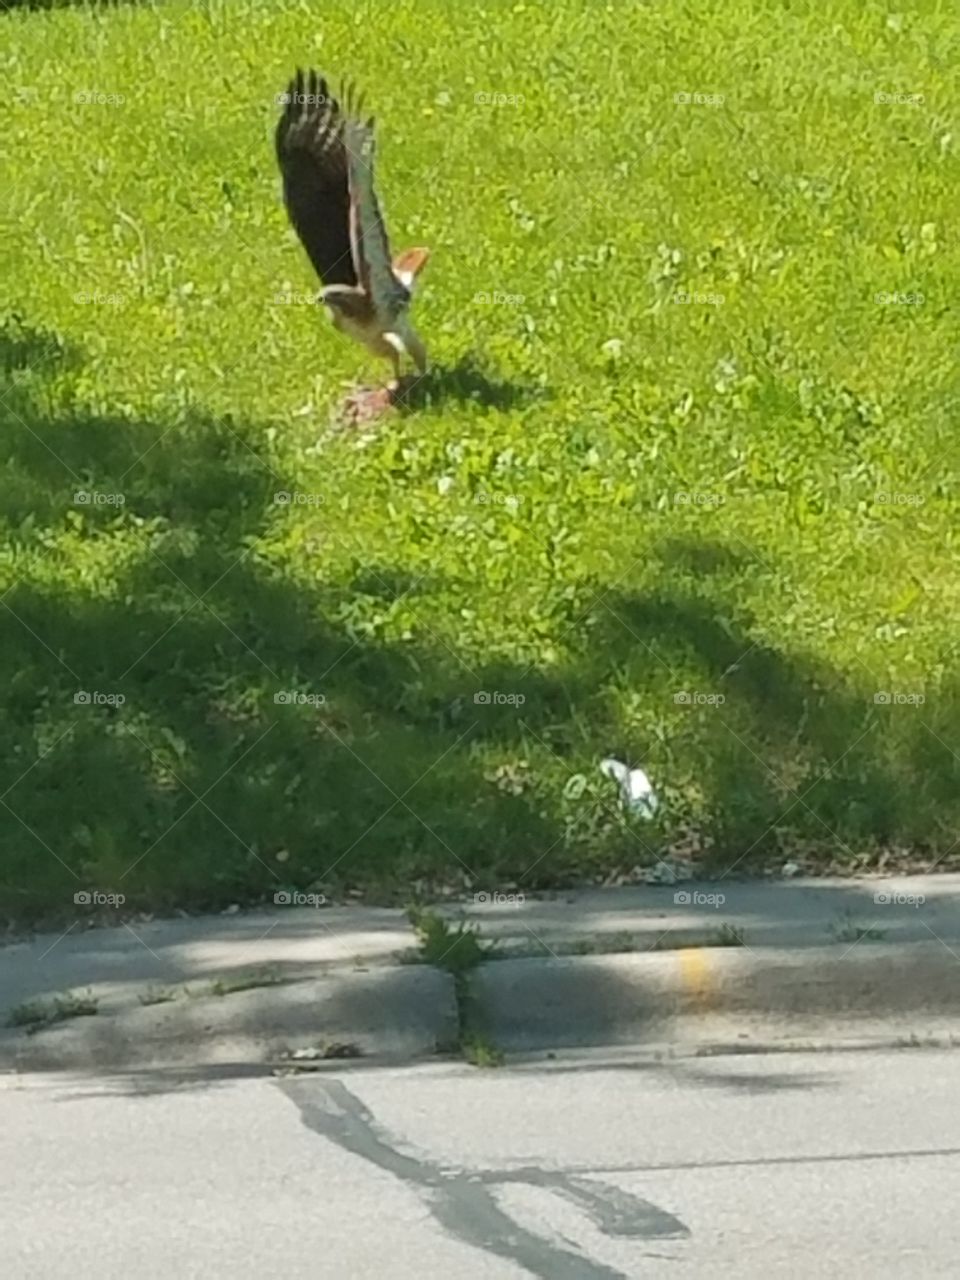 Hawk catching its lunch